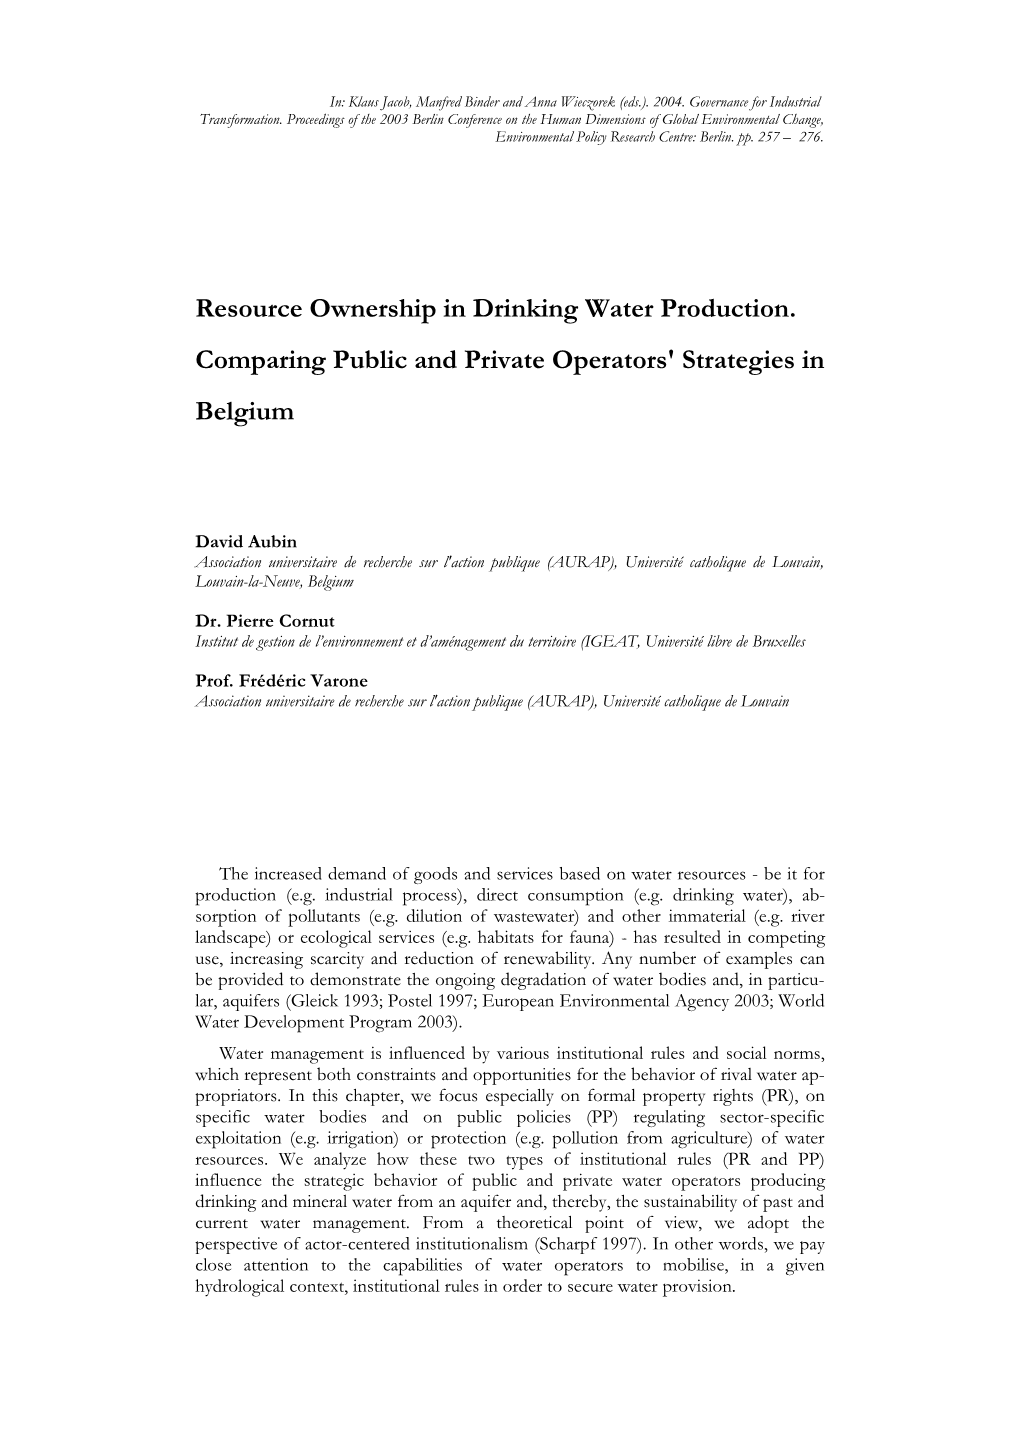 Resource Ownership in Drinking Water Production. Comparing Public and Private Operators' Strategies in Belgium